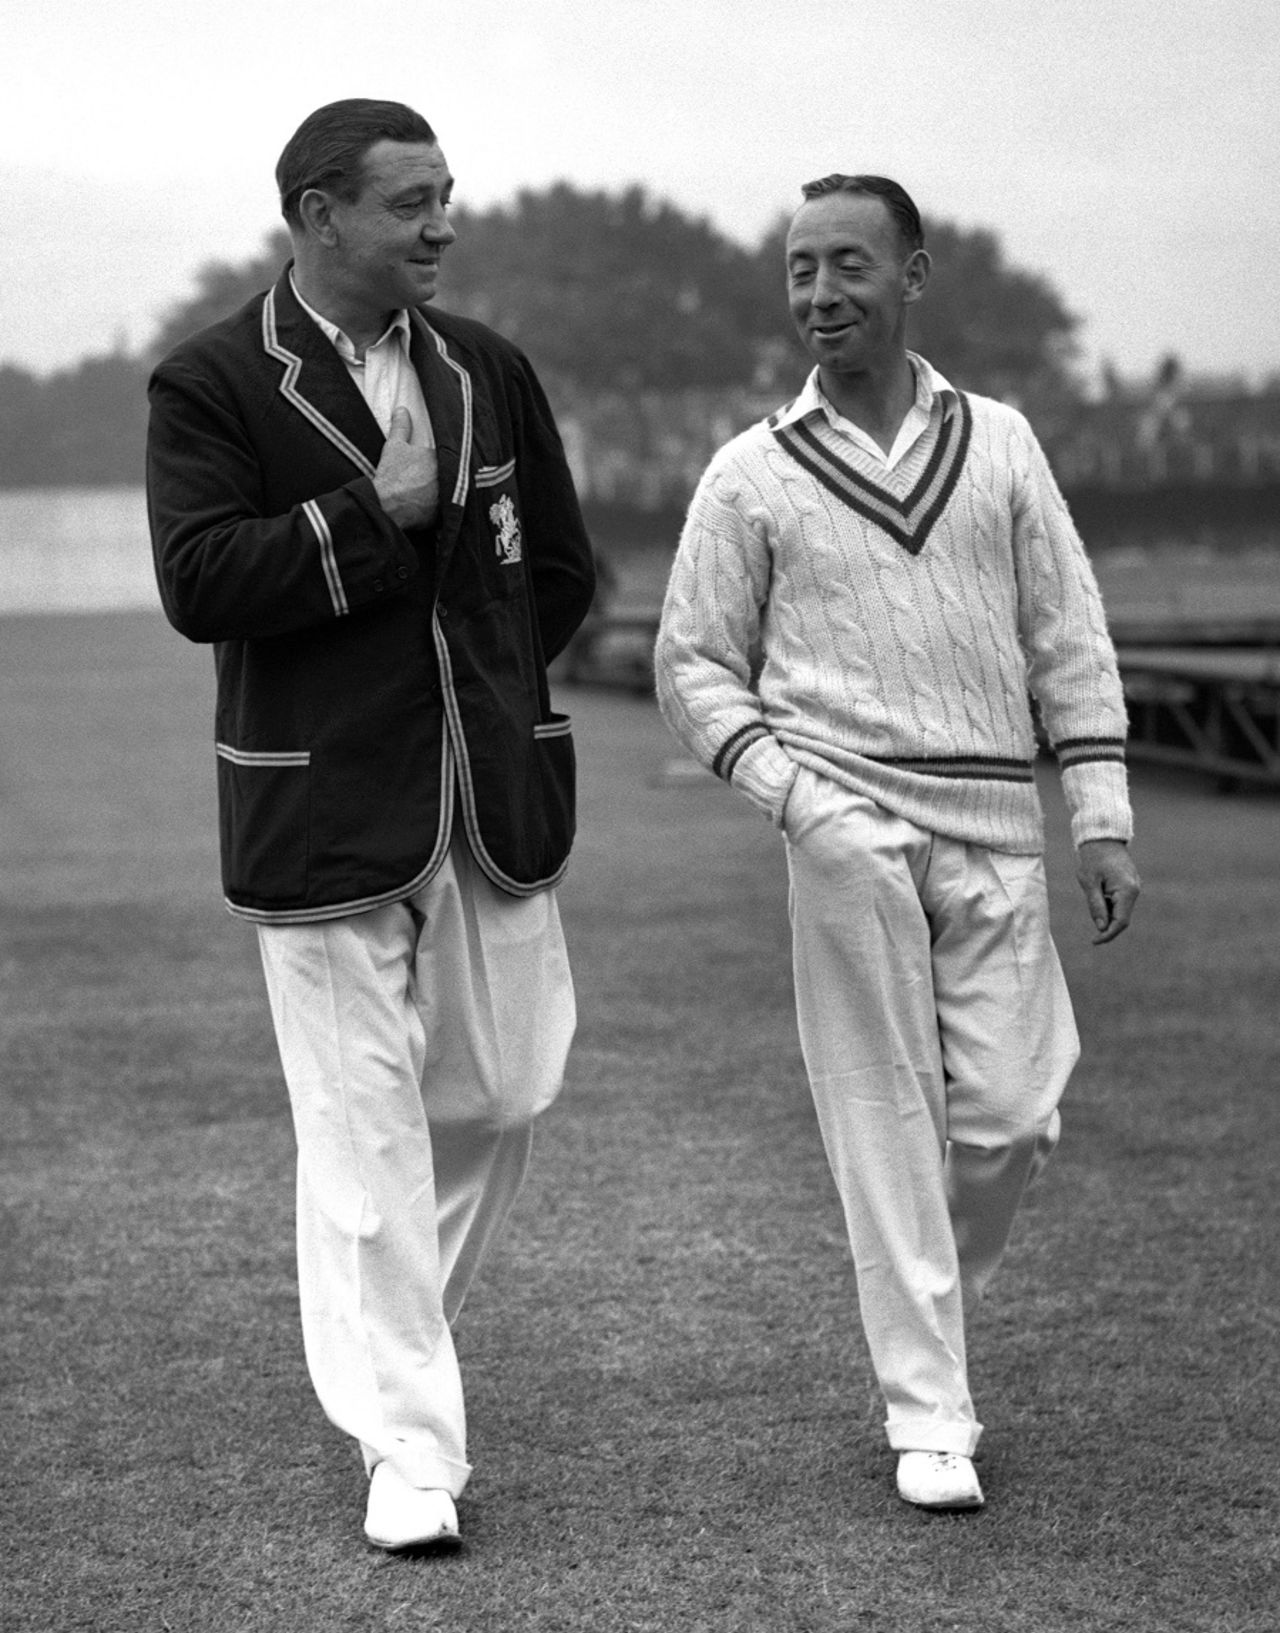 Wally Hammond and Lindsay Hassett walks back from the toss, England XI v Australian Services, First Victory Test, Lord's, May 19, 1945 